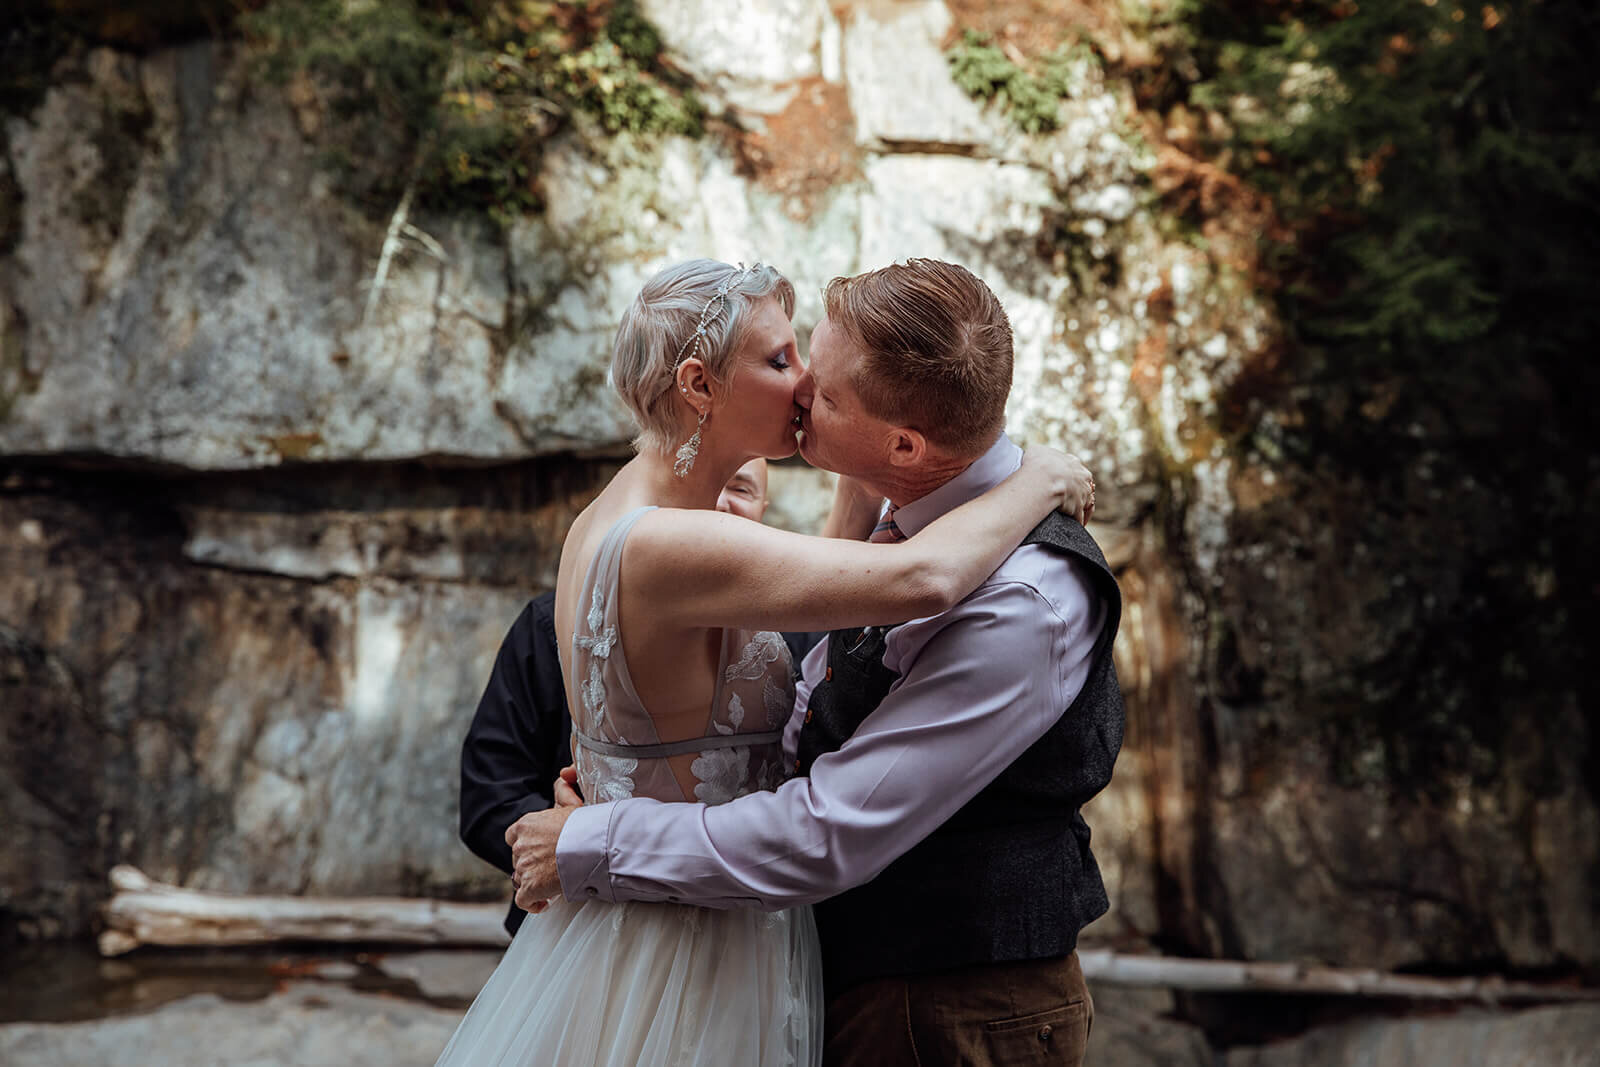  Couple shares first kiss as married couple during their elopement ceremony at Warren Falls in Vermont 